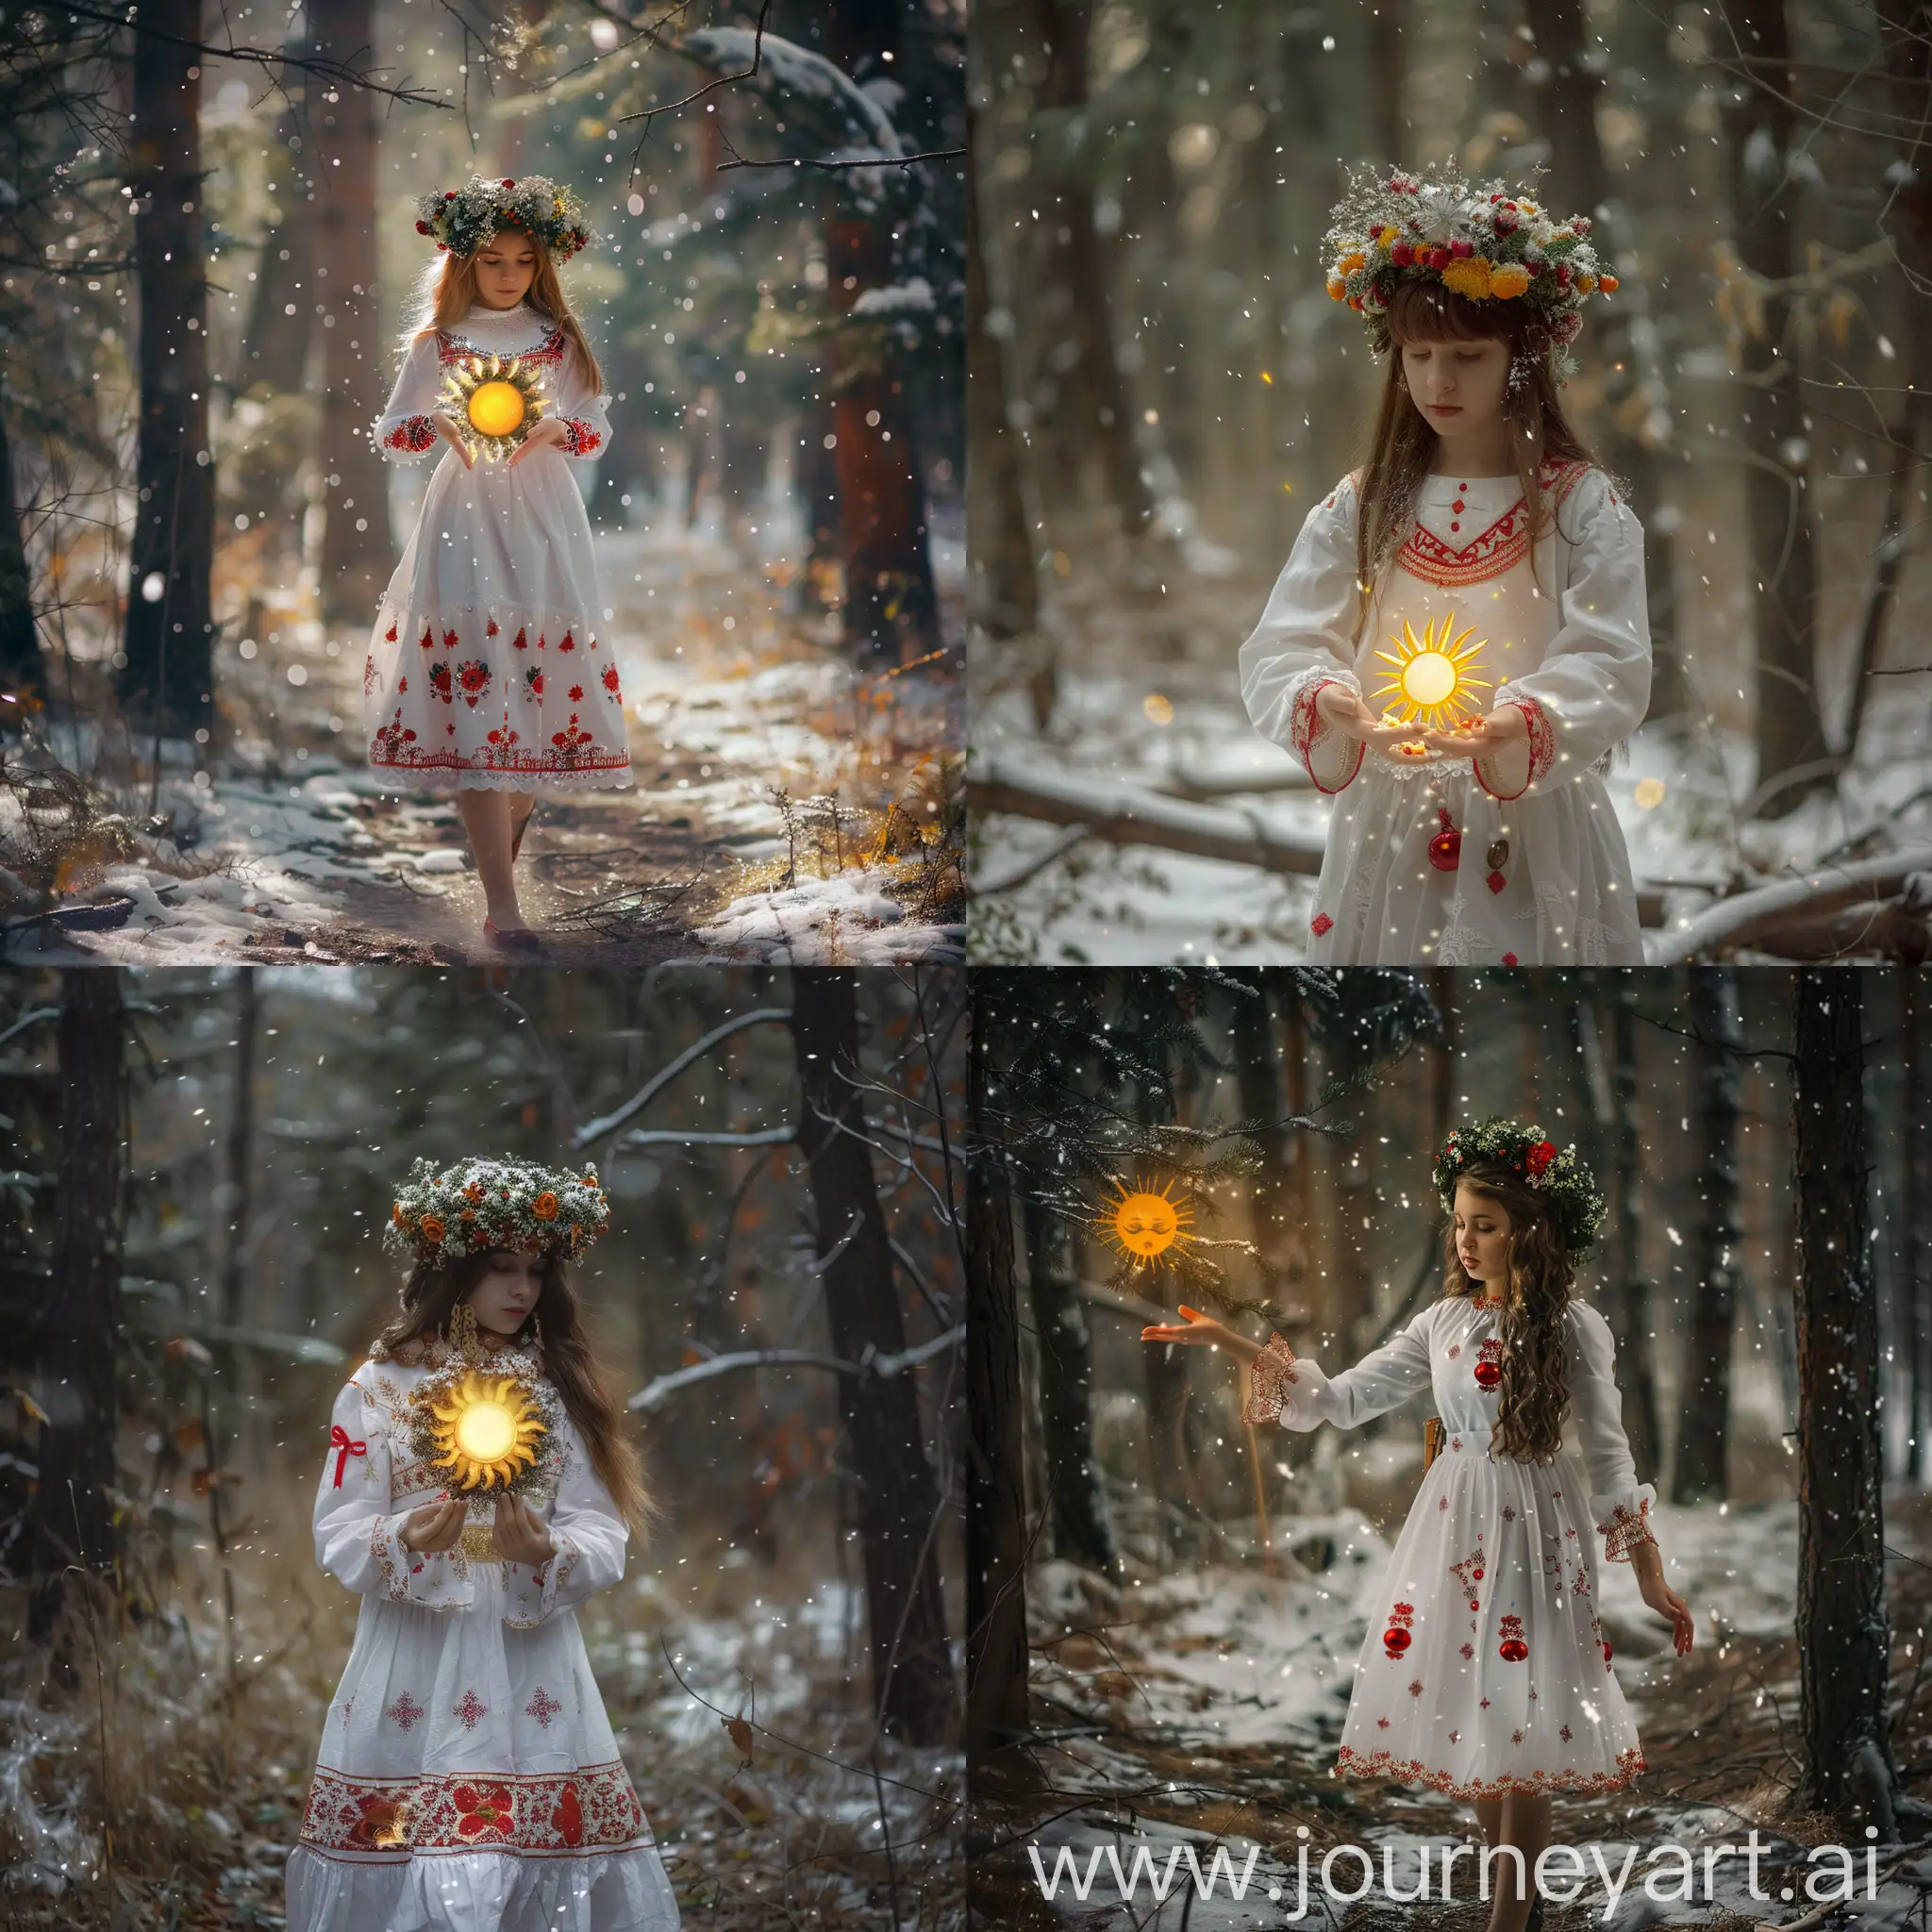 Enchanting-Forest-Maiden-WinterSummer-Fusion-with-Floral-Wreath-and-Sun-Embrace